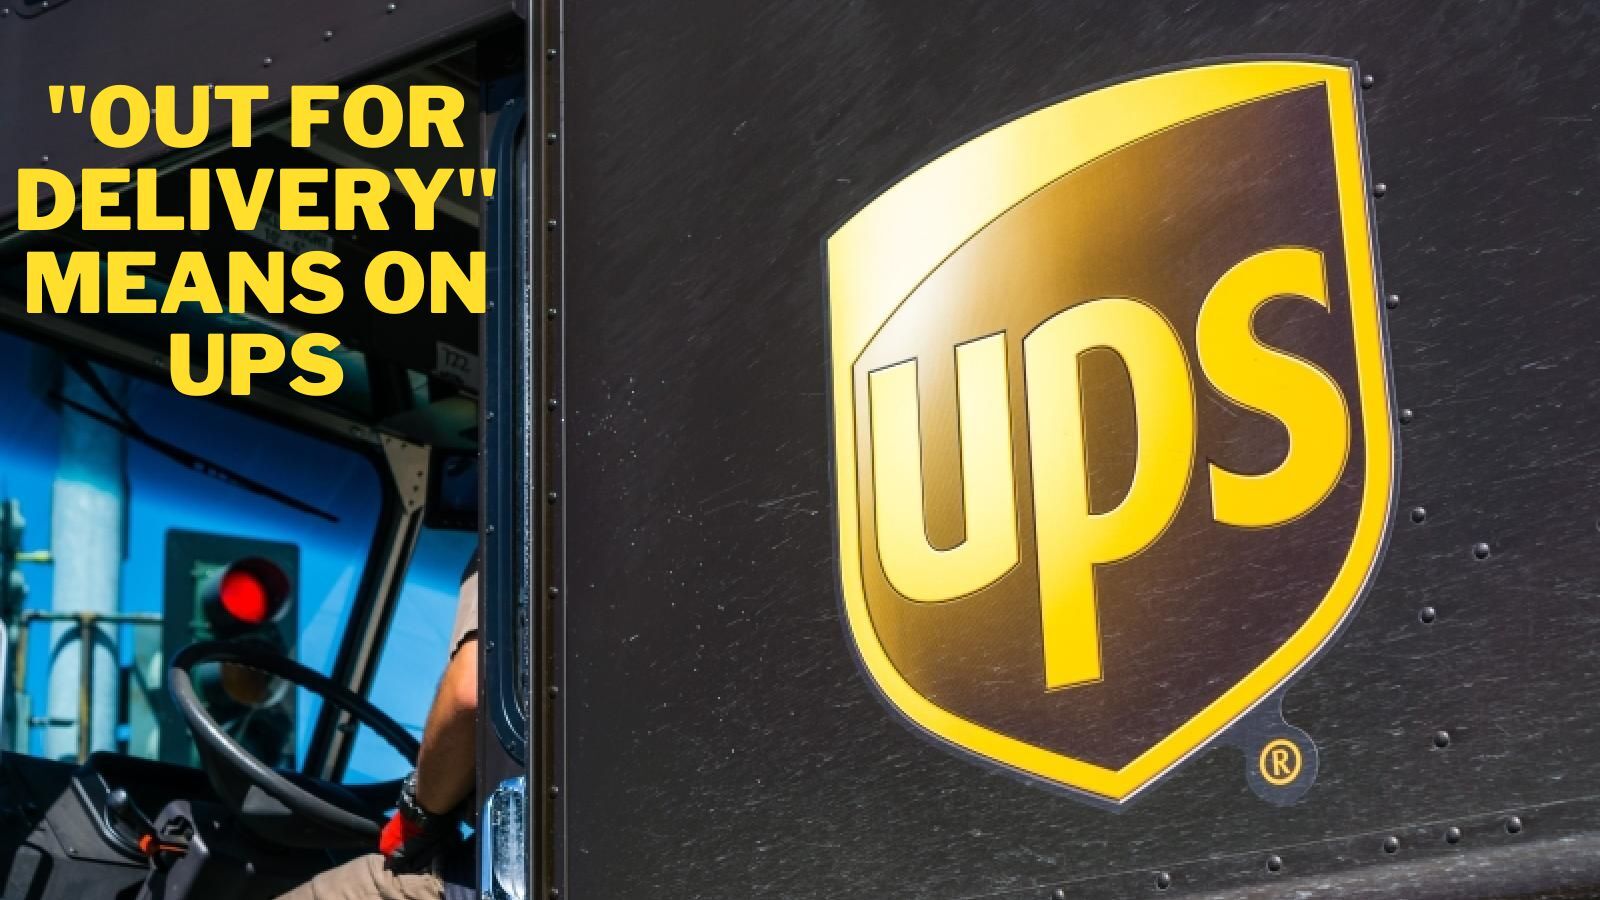 What Does "Out for Delivery" Means On UPS?